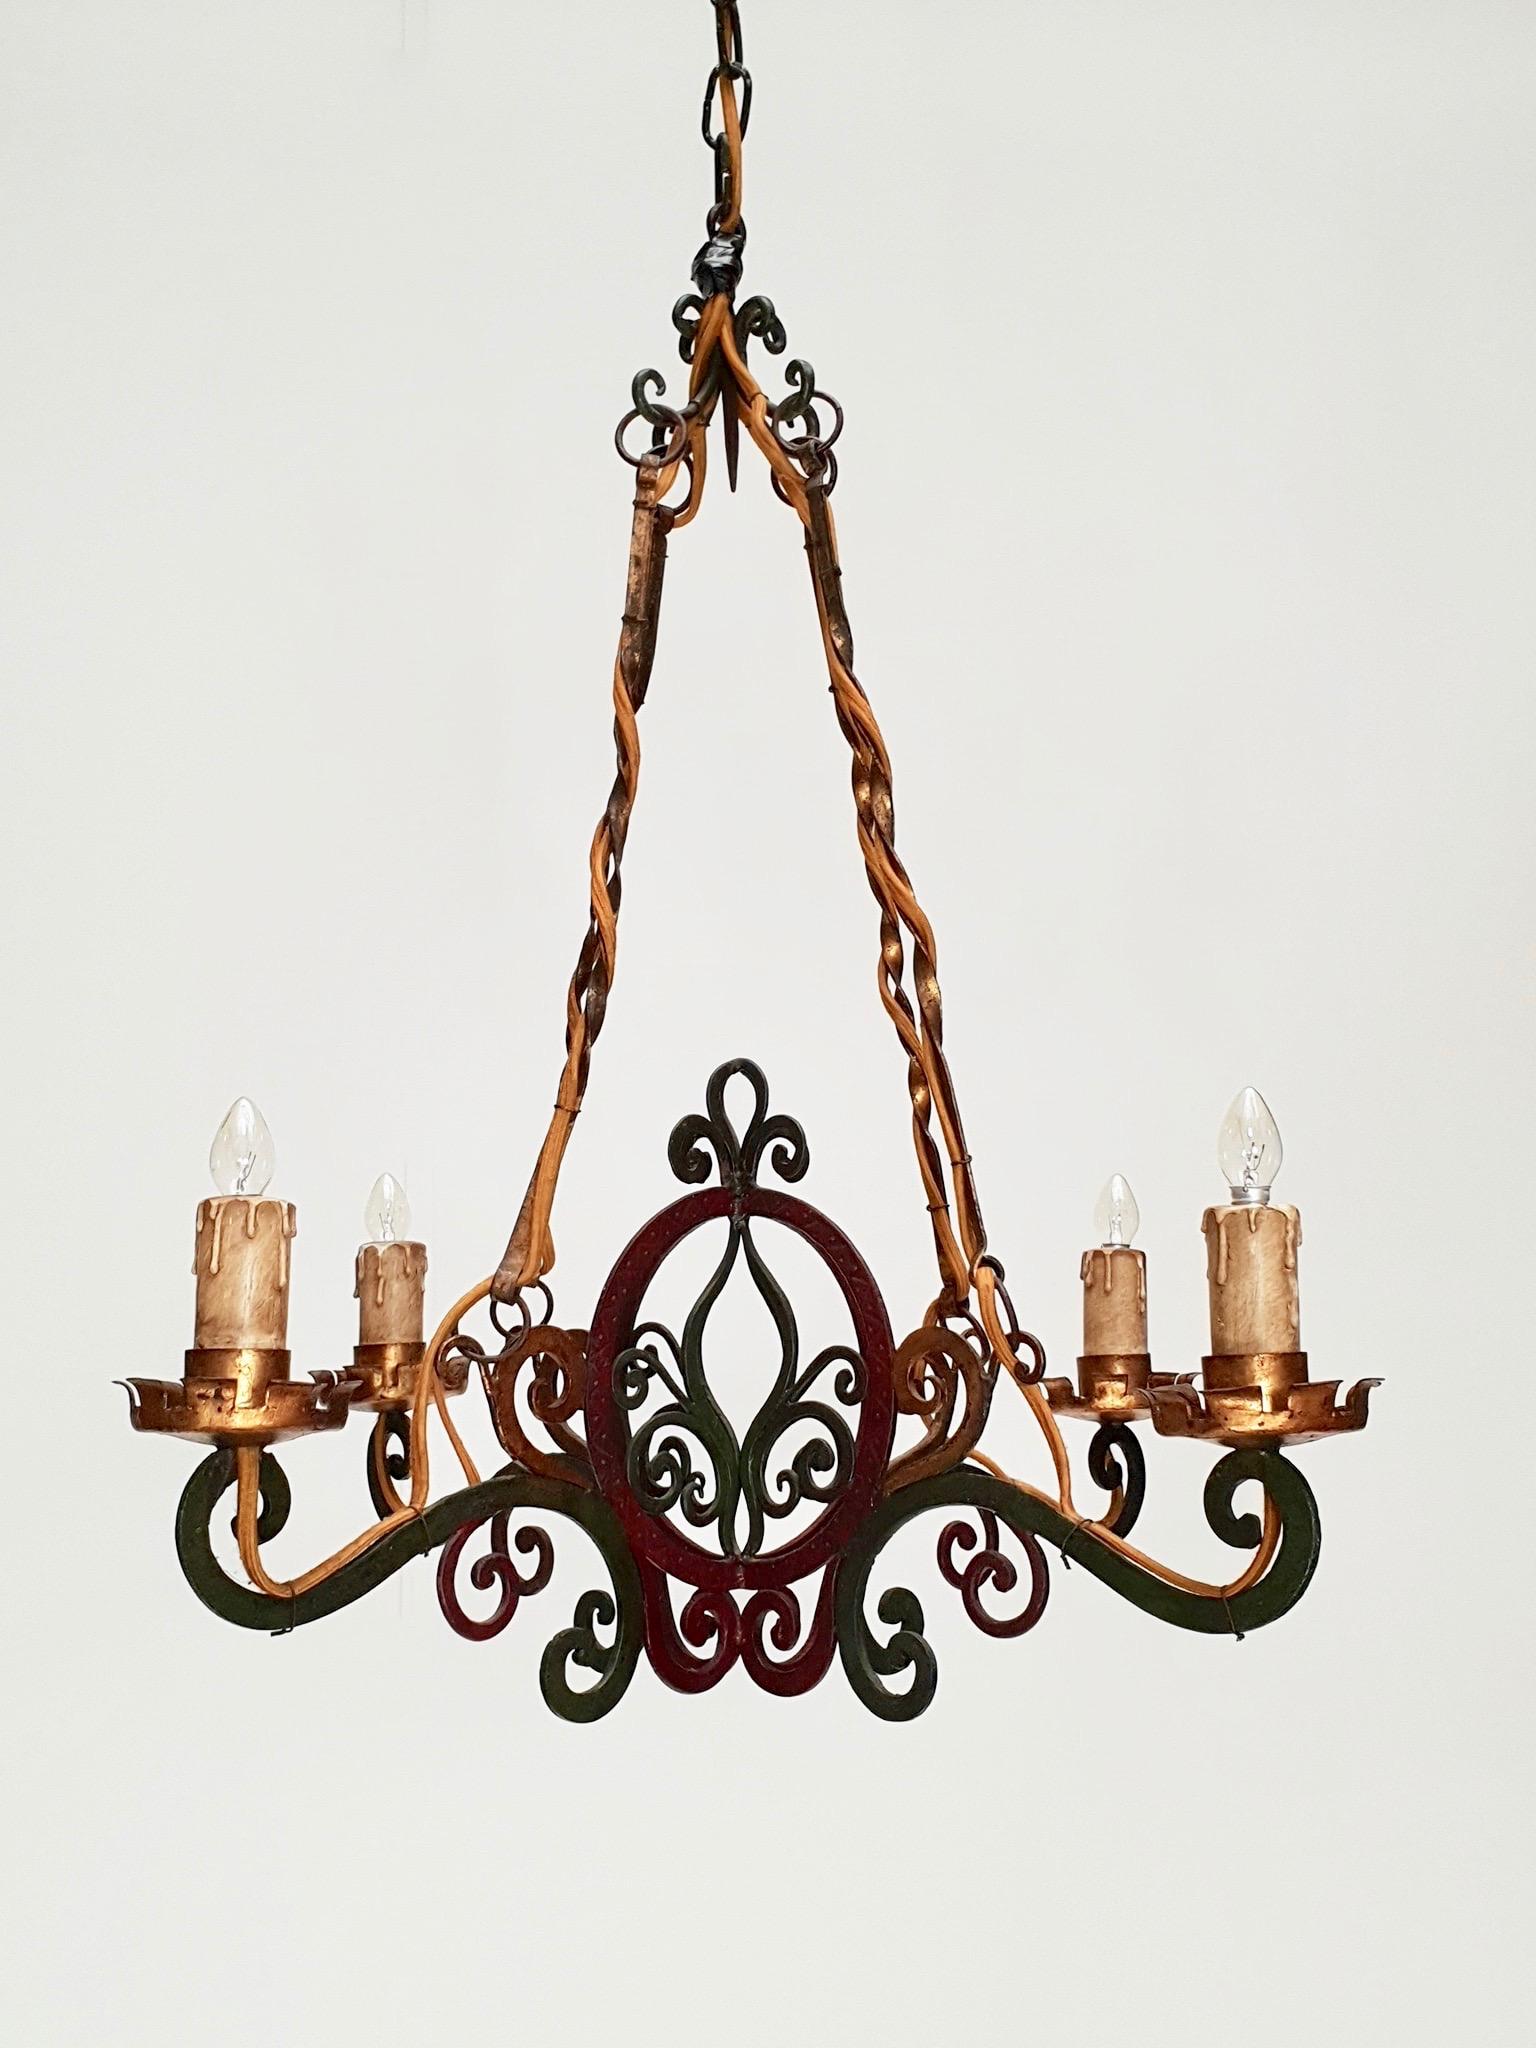 Italian painted wrought iron four lights chandelier.
Measures: Diameter 60 cm
Height fixture 63 cm.
The total height including the chain is 120 cm.
Four E14 bulbs.